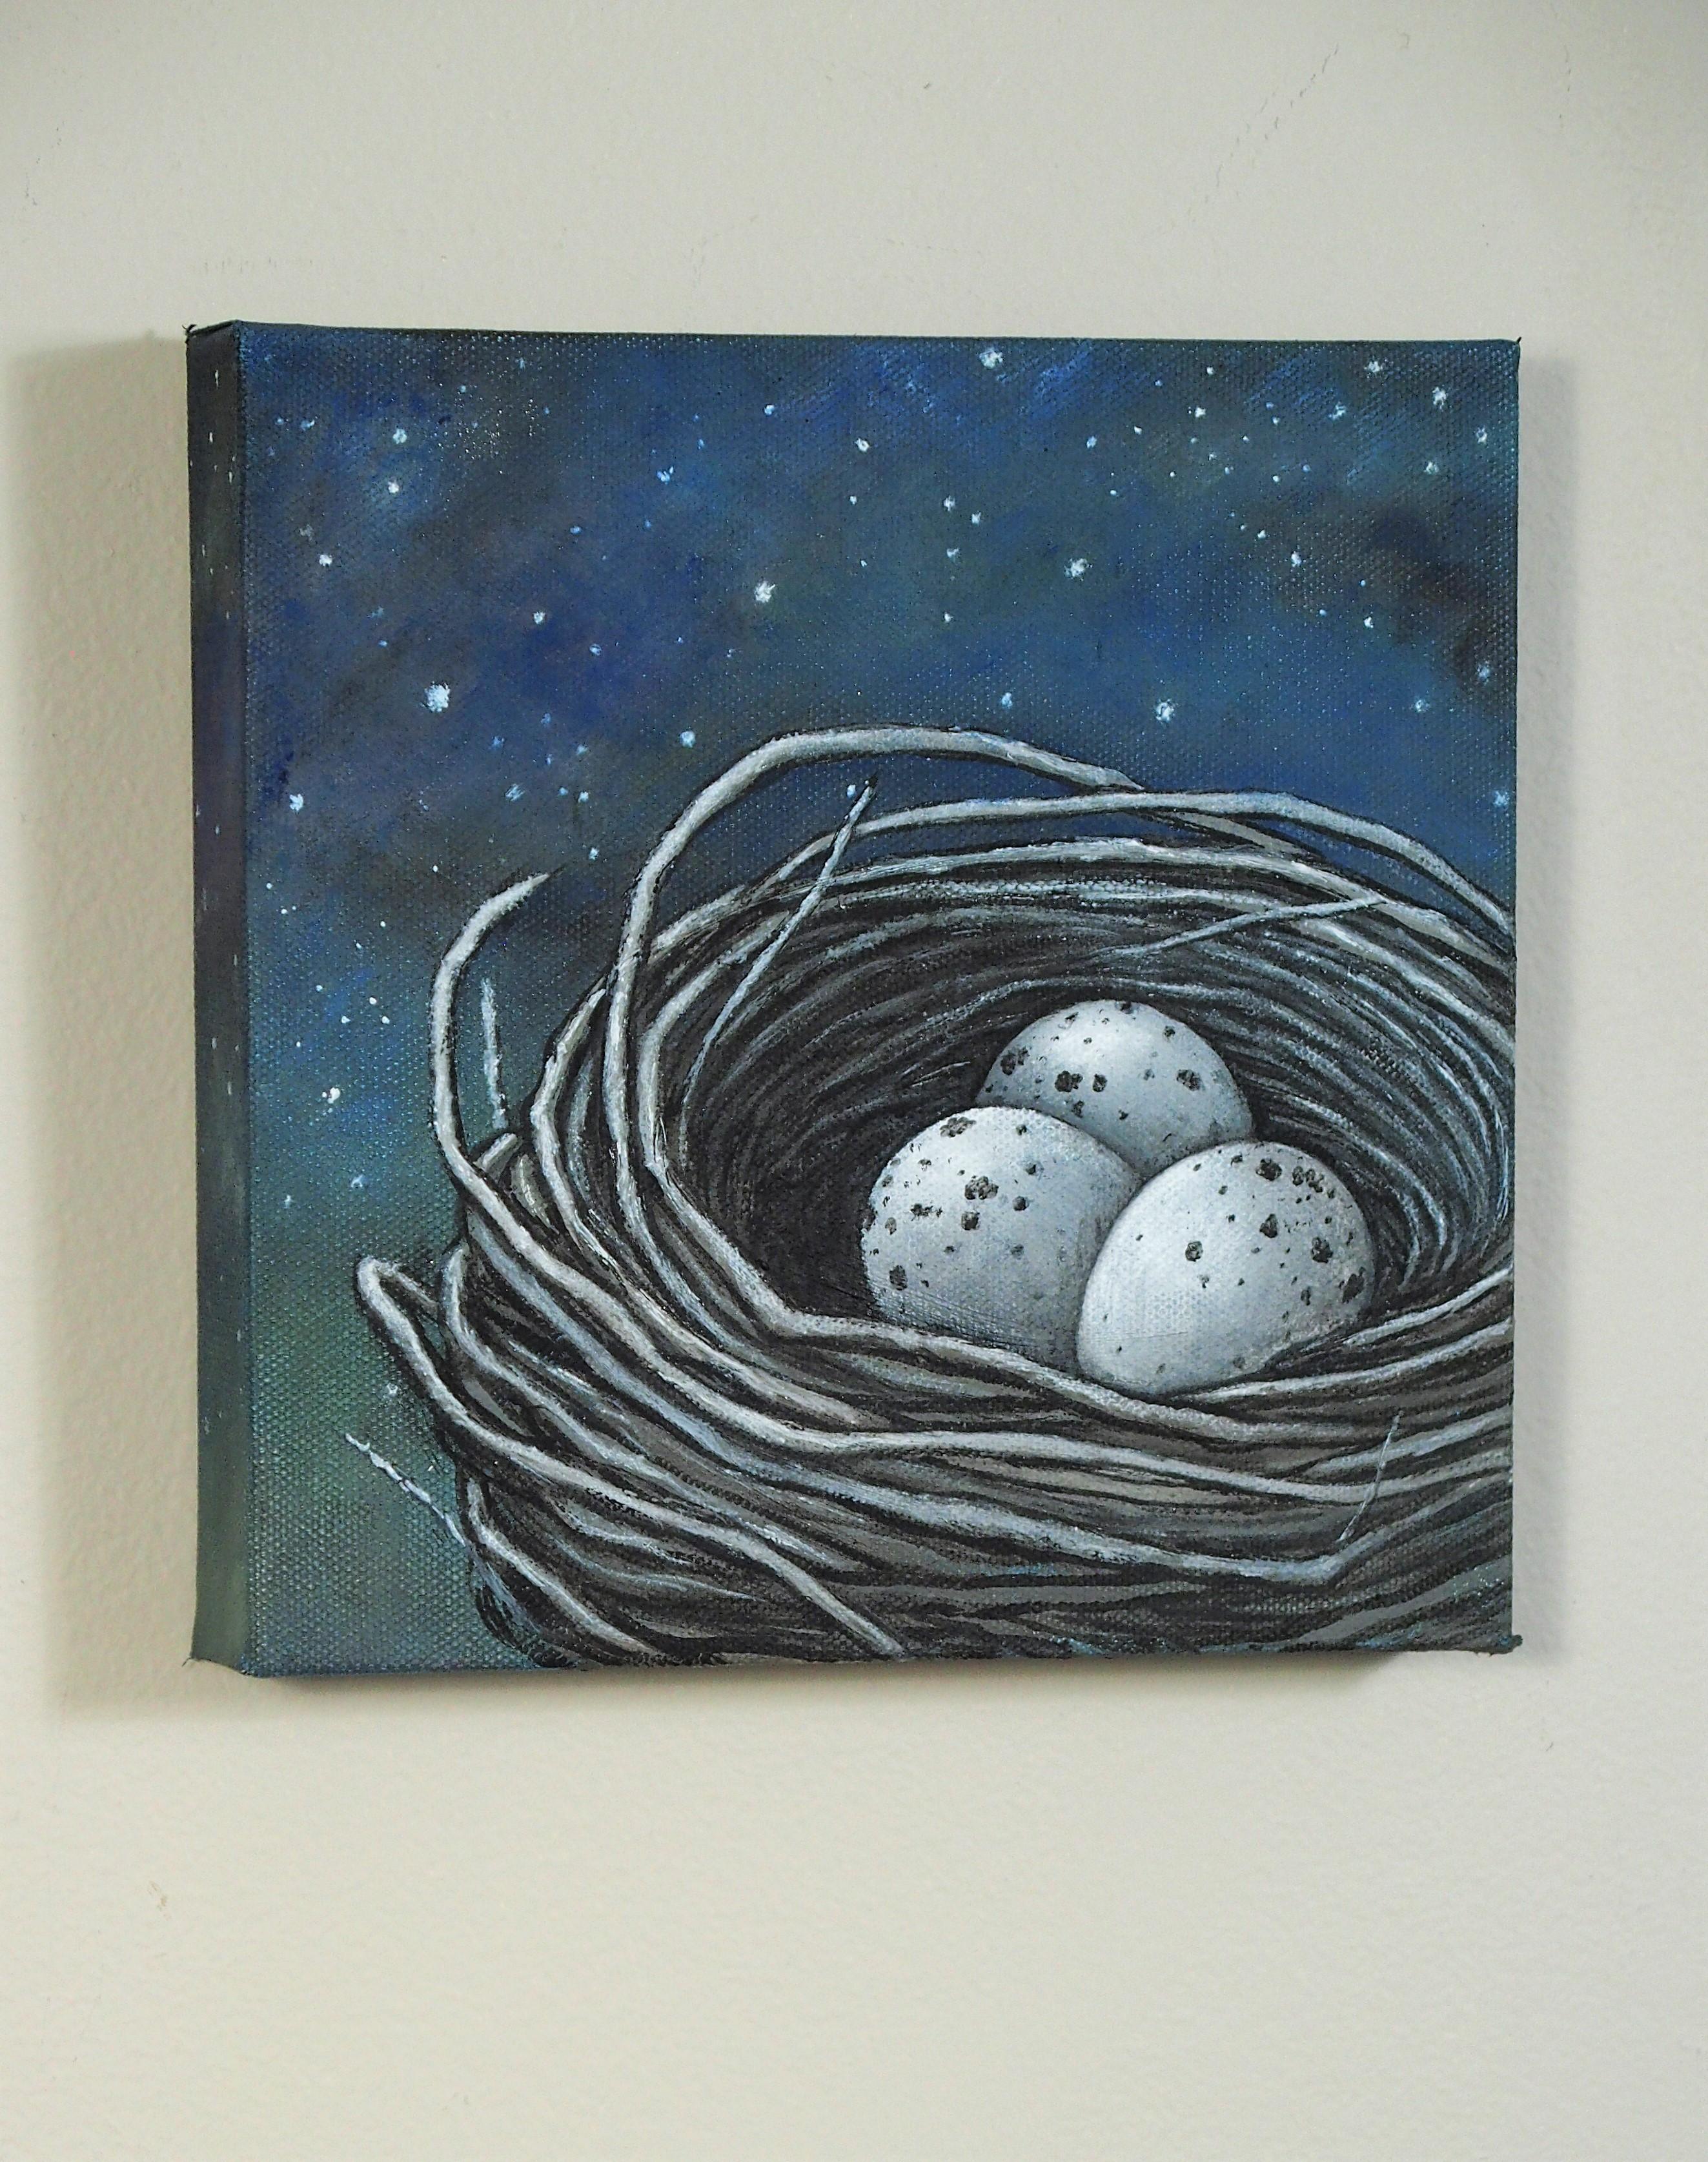 <p>Artist Comments<br>A little nest painting with a big title! The title is a quote from William Shakespeare.</p><p>About the Artist<br>Jennifer Ross grew up surrounded by the art of her mother and grandfather. Her attempt to follow in their